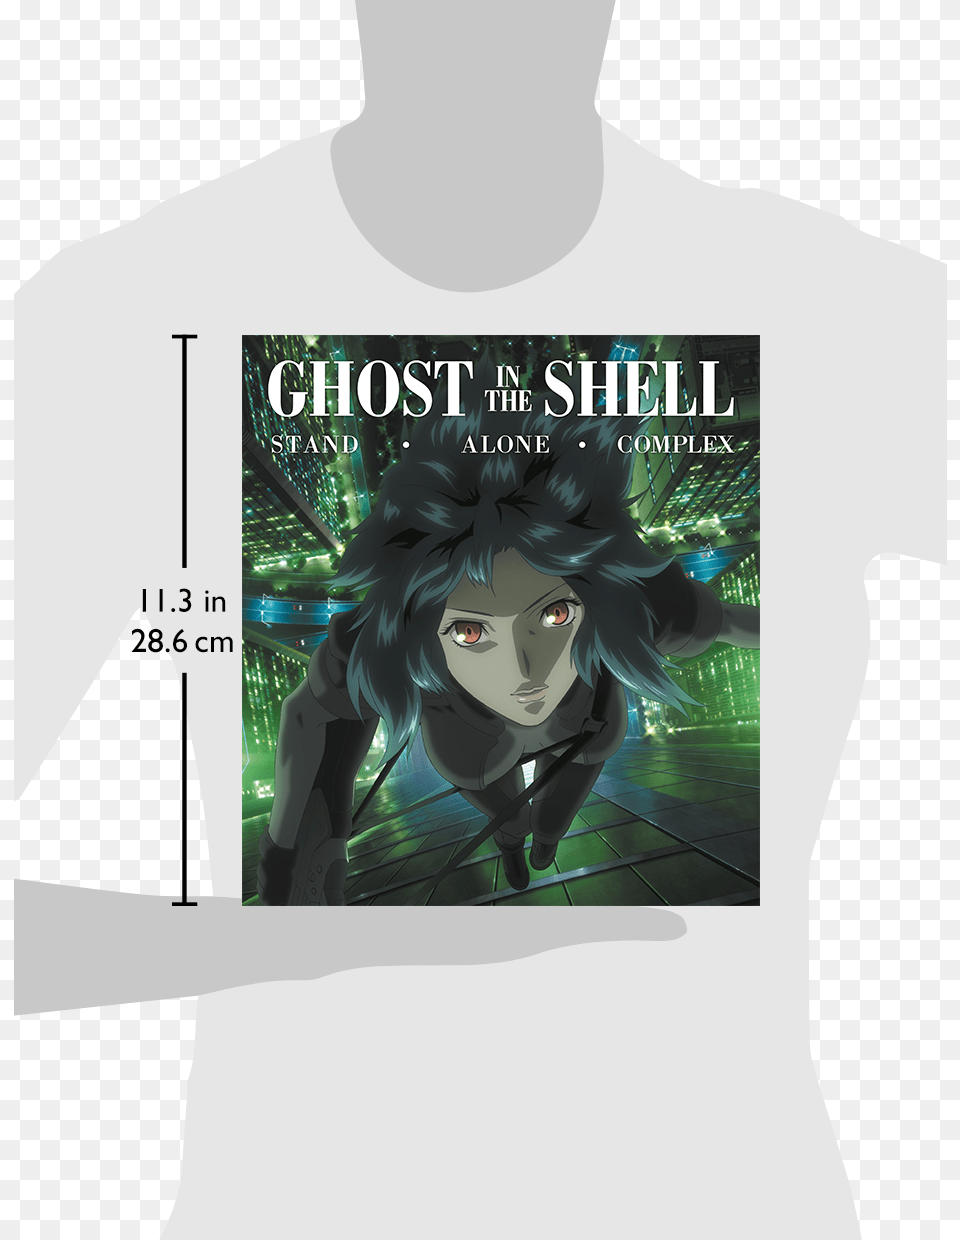 Ghost In The Shell Stand Alone Complex Blu Ray, Book, Clothing, Comics, T-shirt Png Image